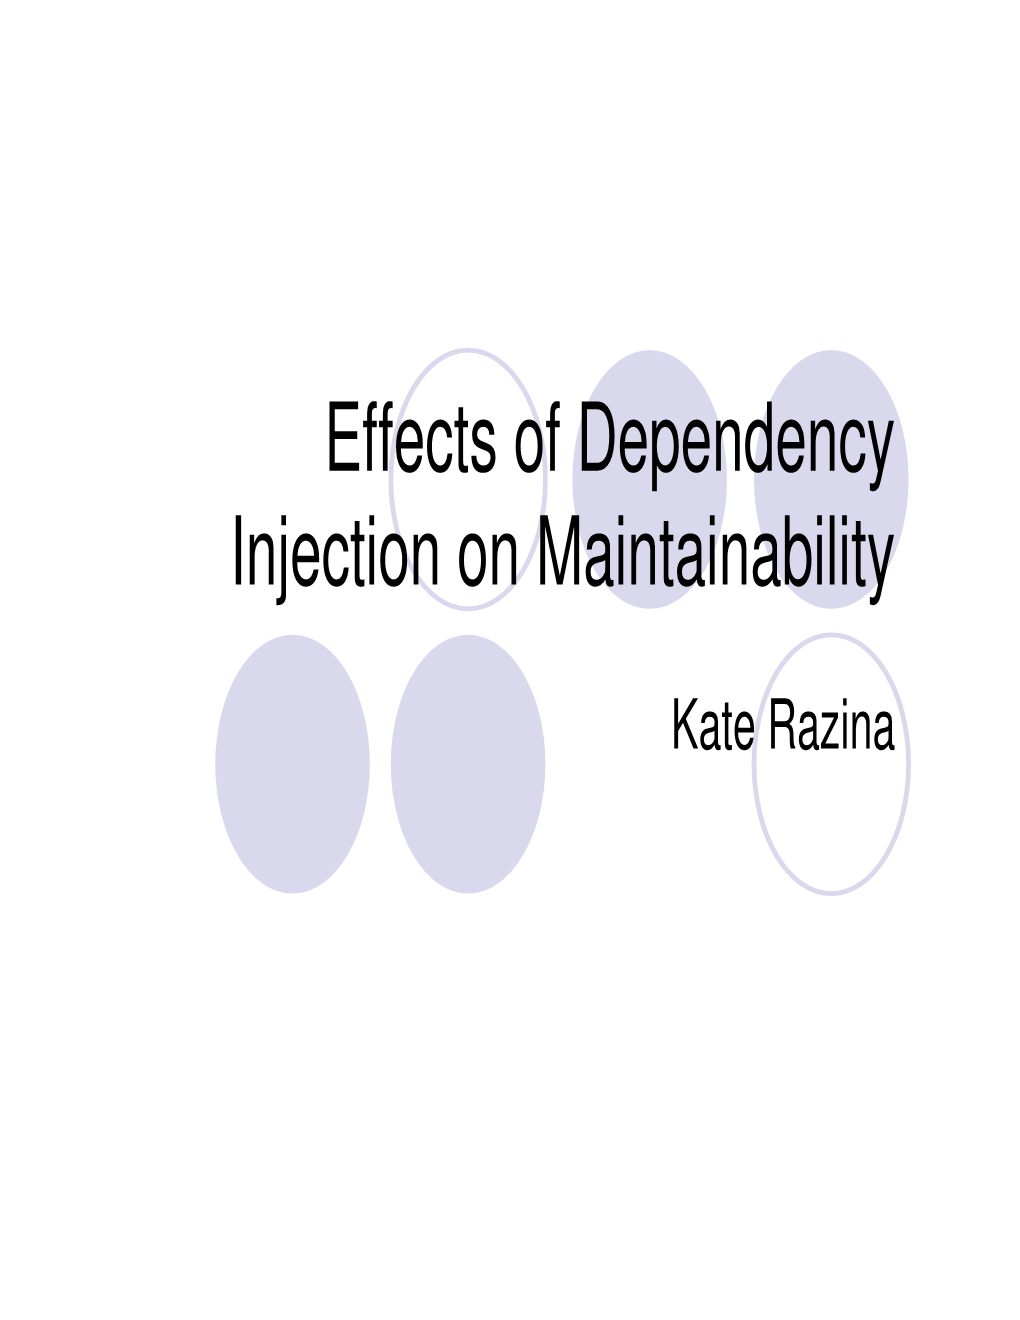 Effects of Dependency Injection on Maintainability